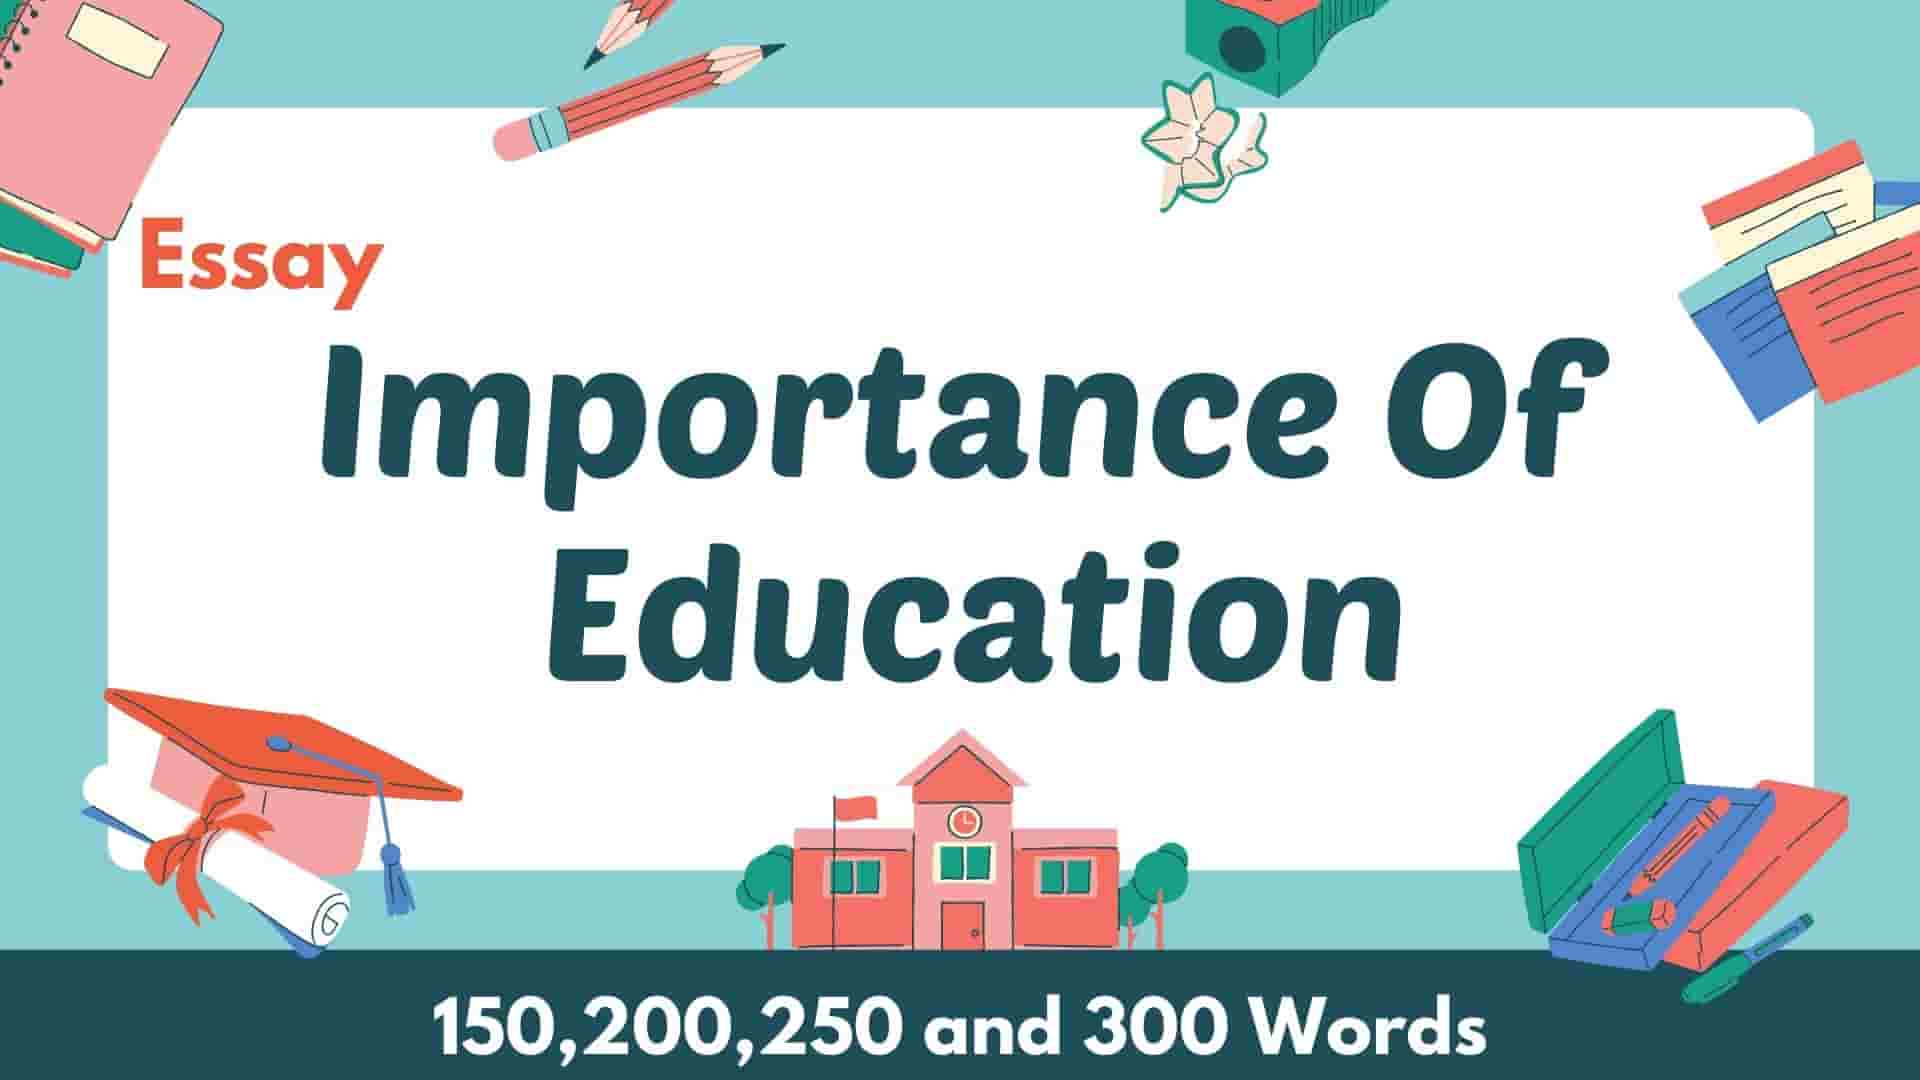 thesis statement of importance of education